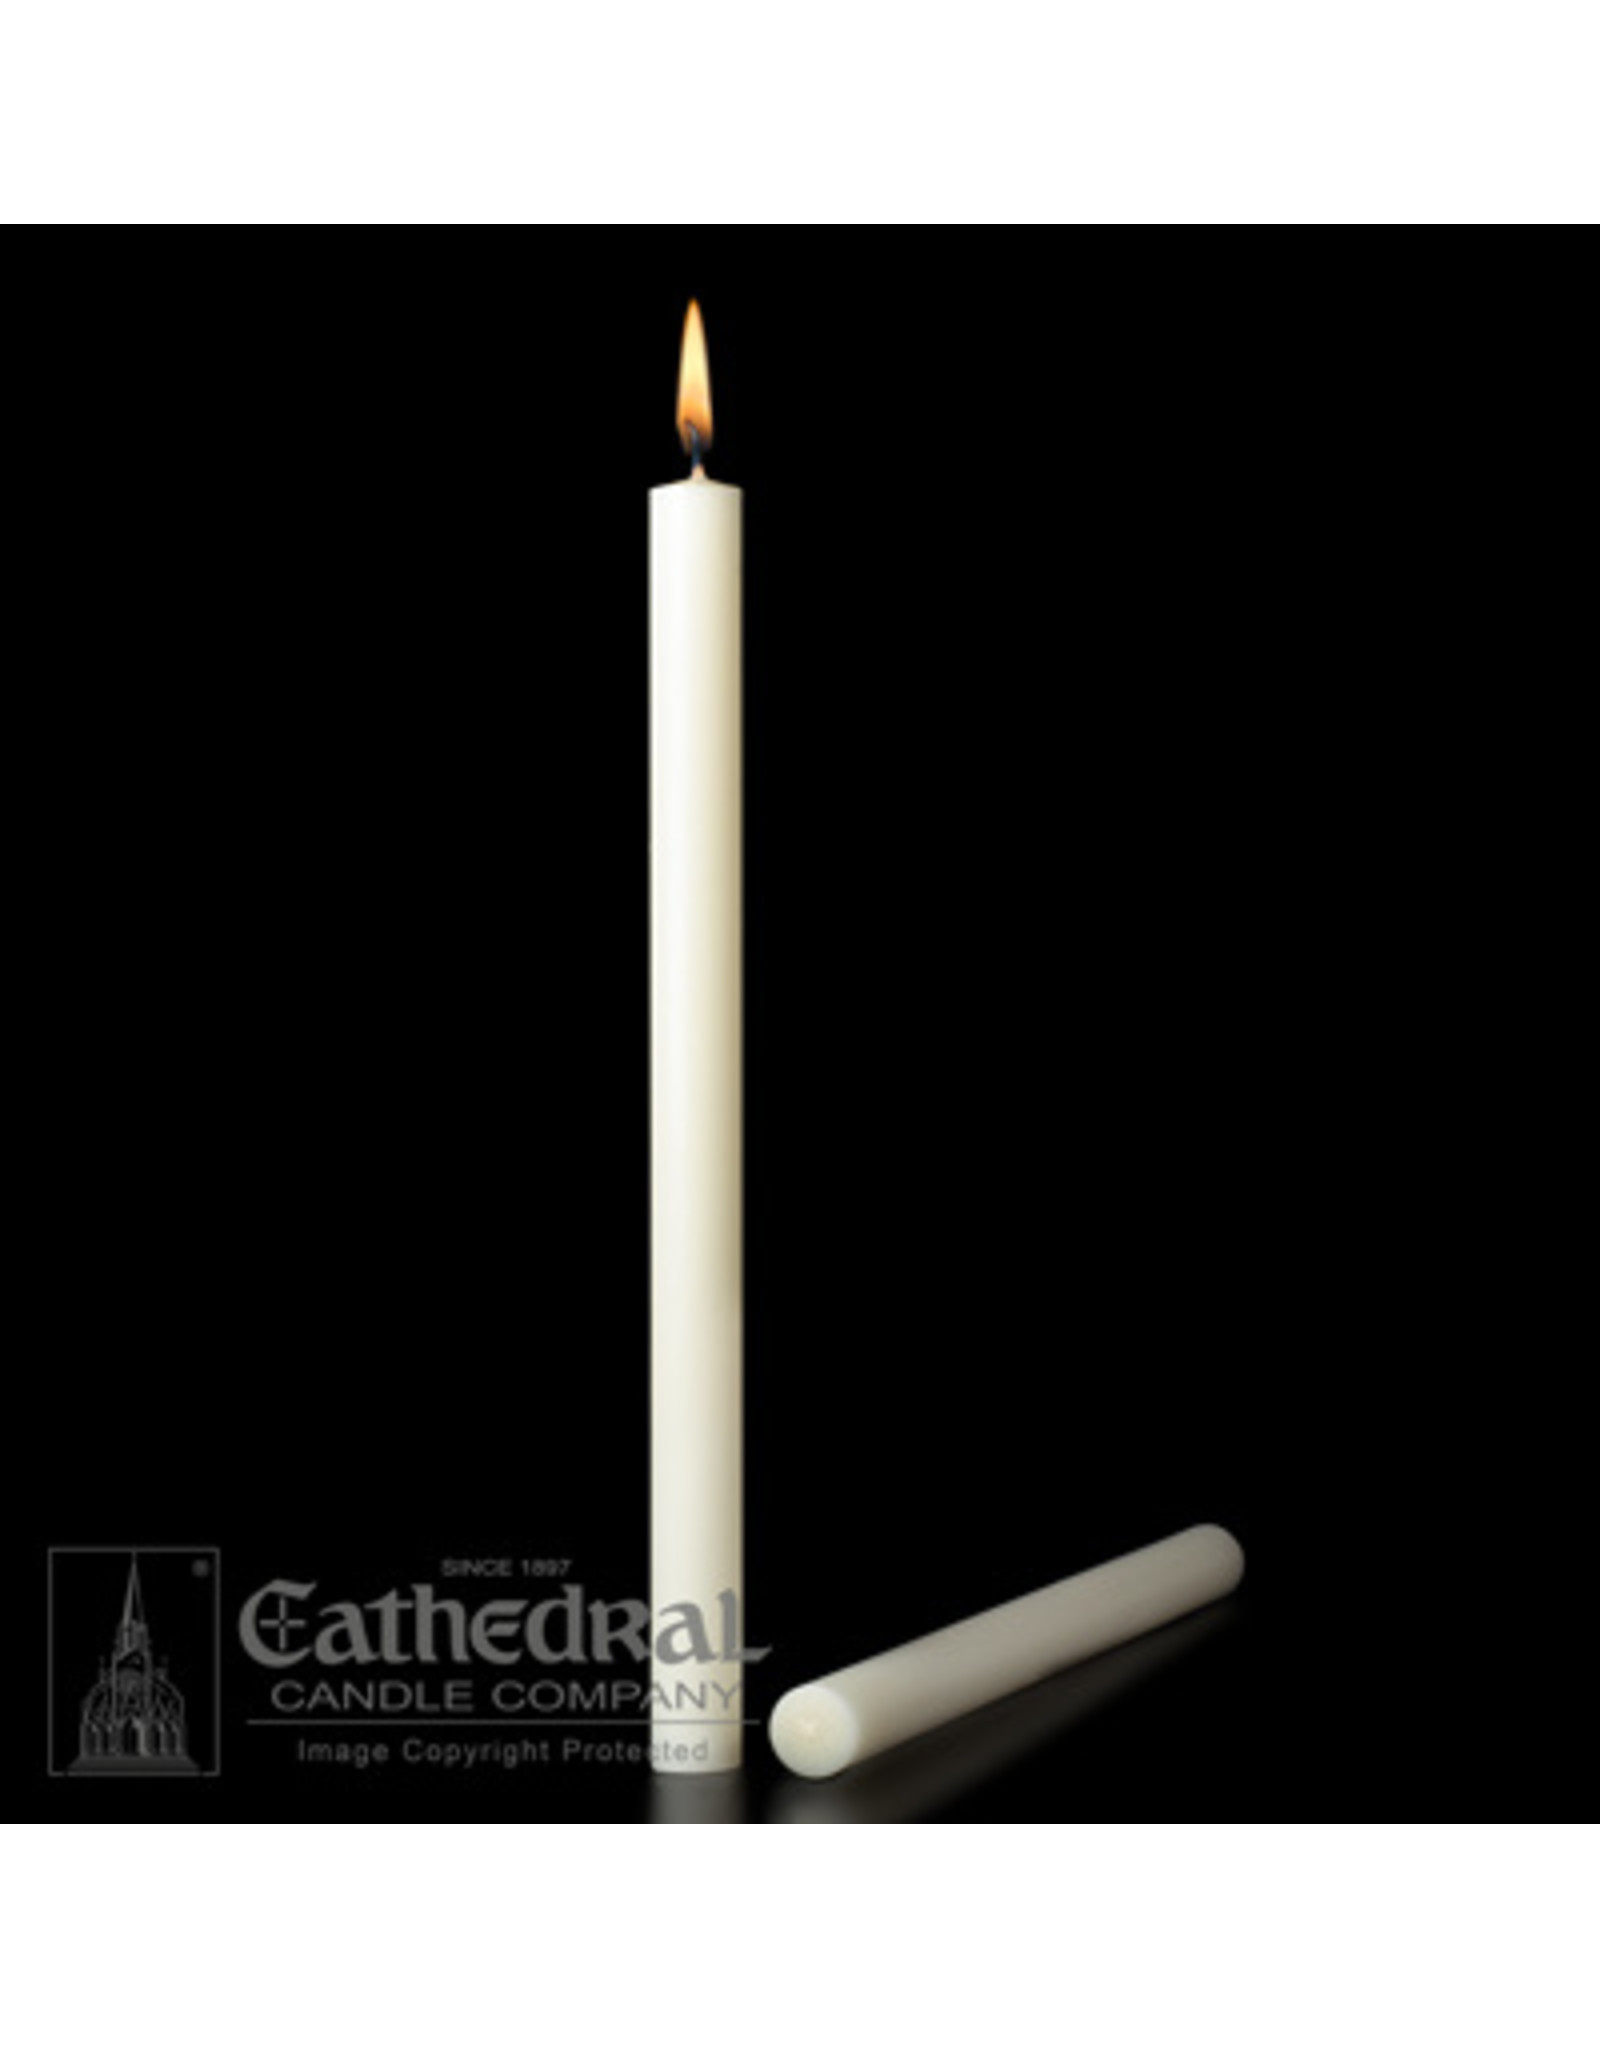 Cathedral Candle 51% Beeswax Altar Candles 7/8"x12" PE (24)